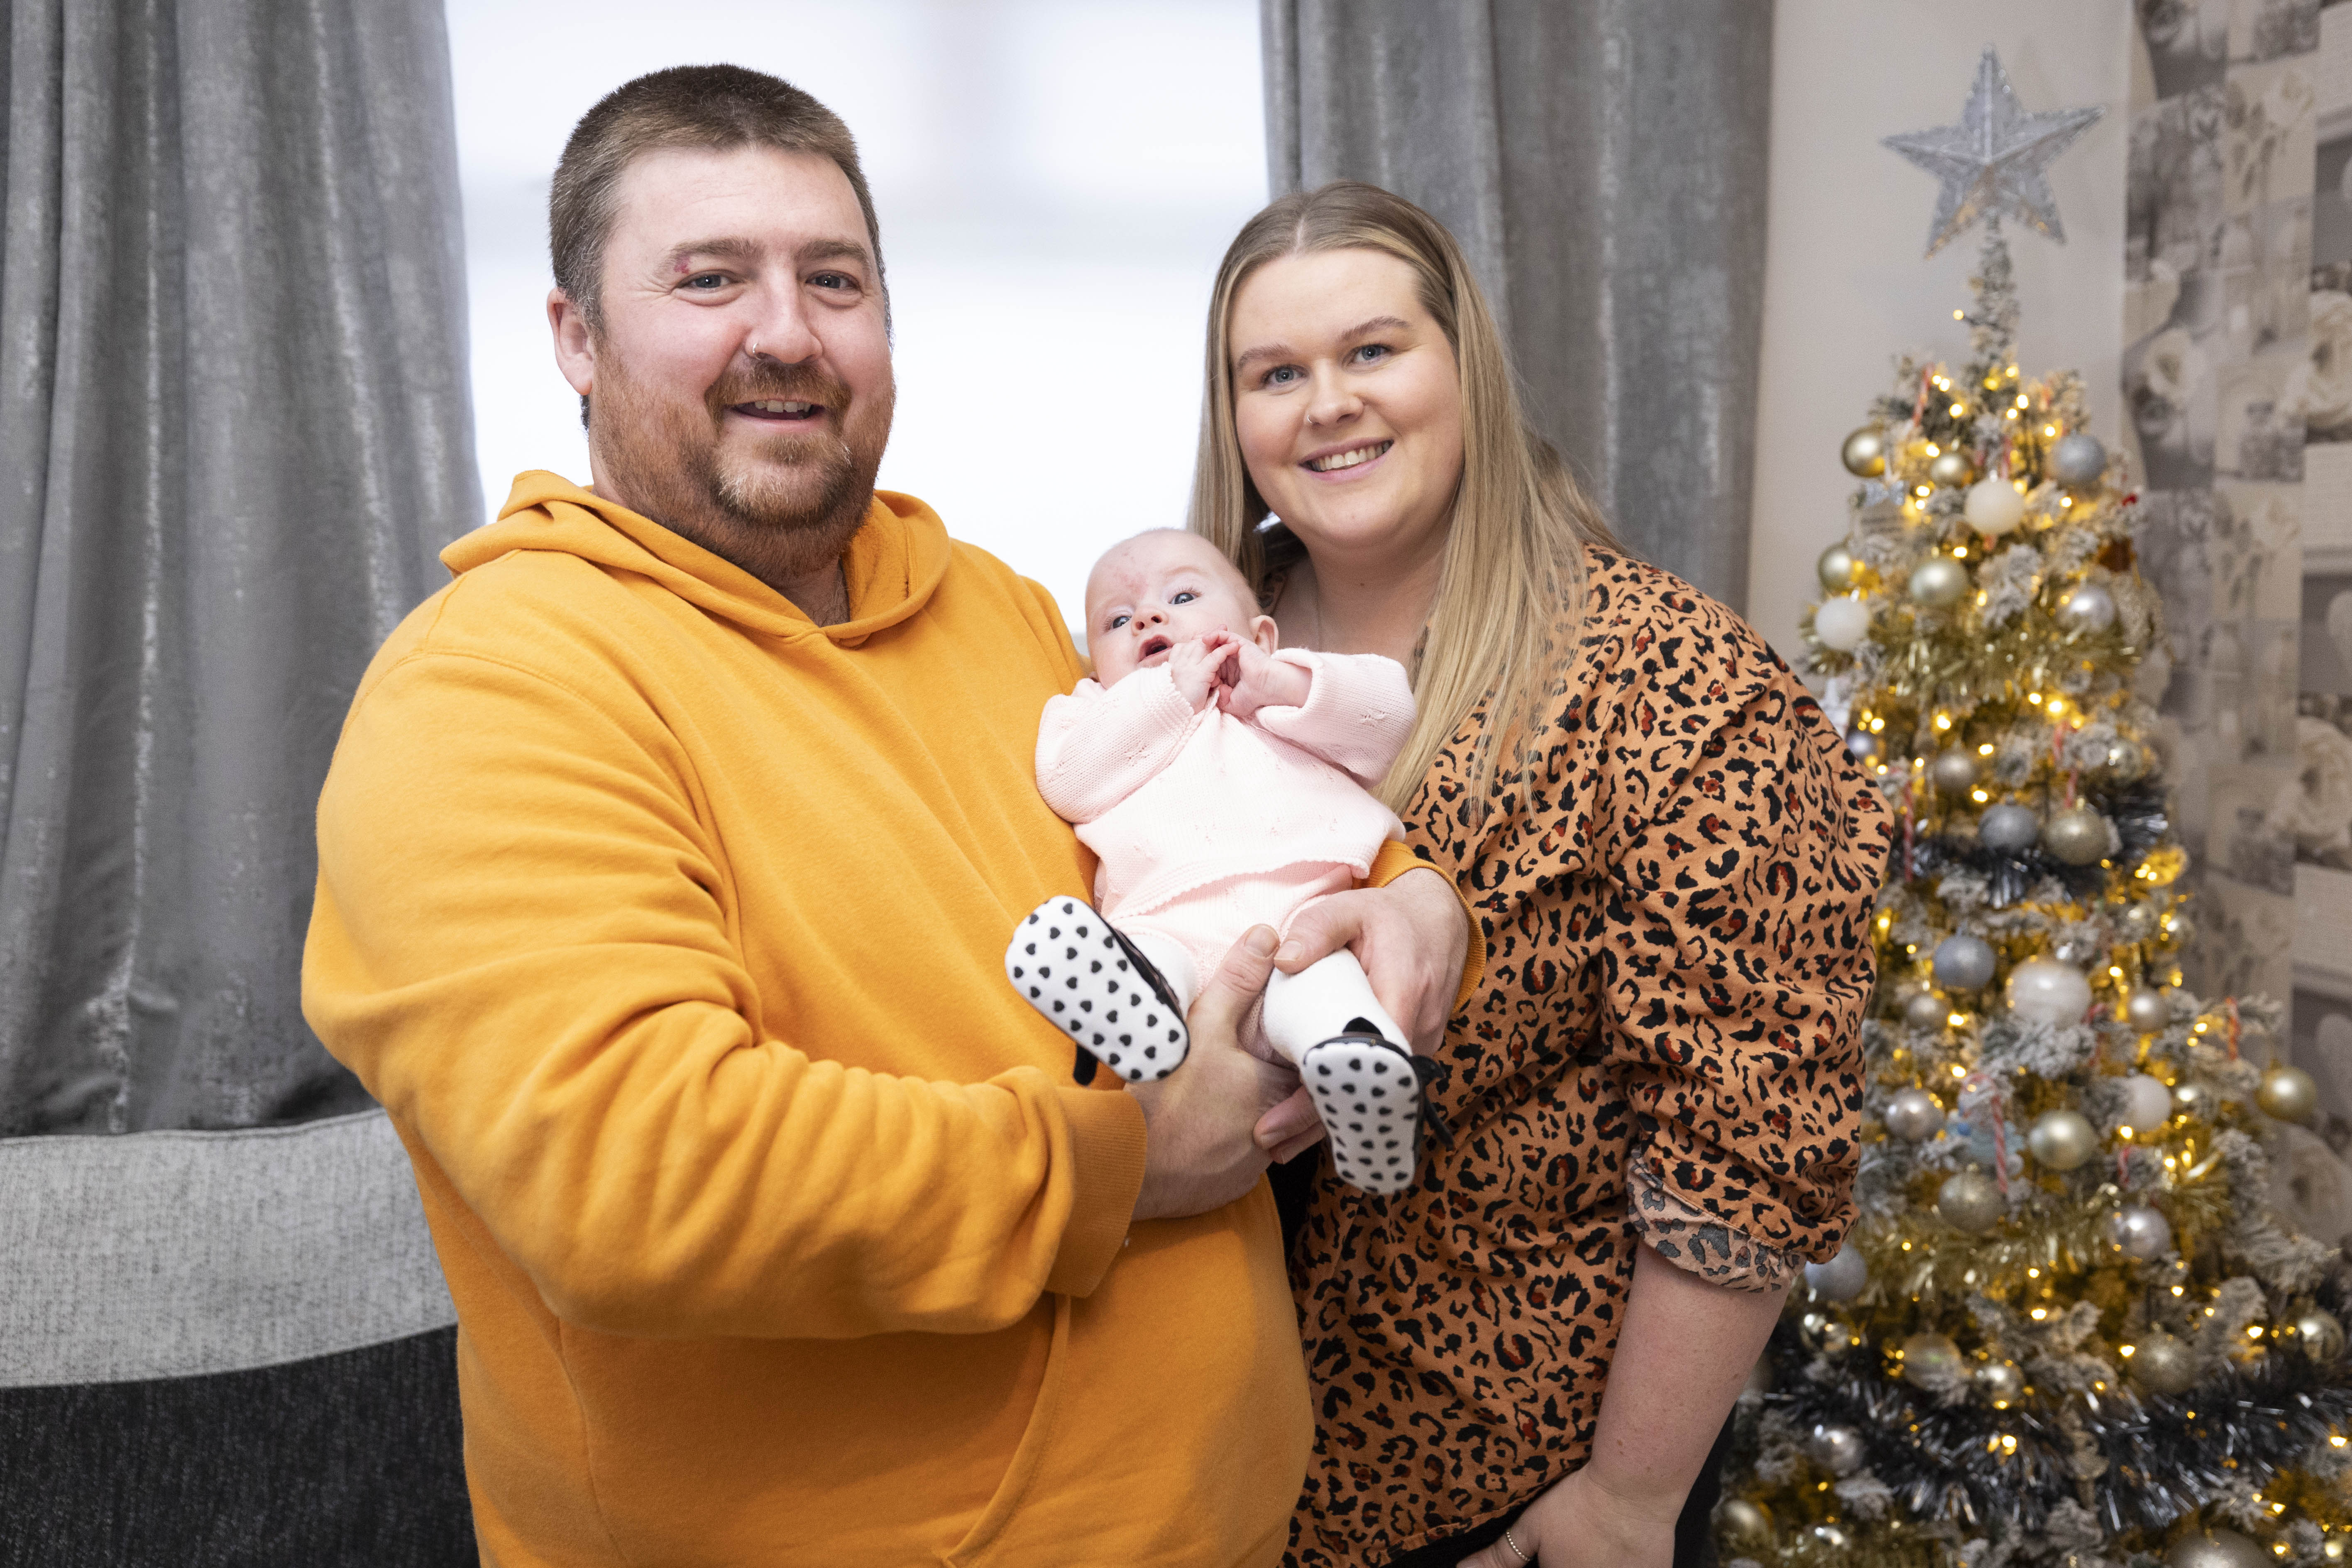 Chris and Louise say Lottie's life was saved by blood transfusions